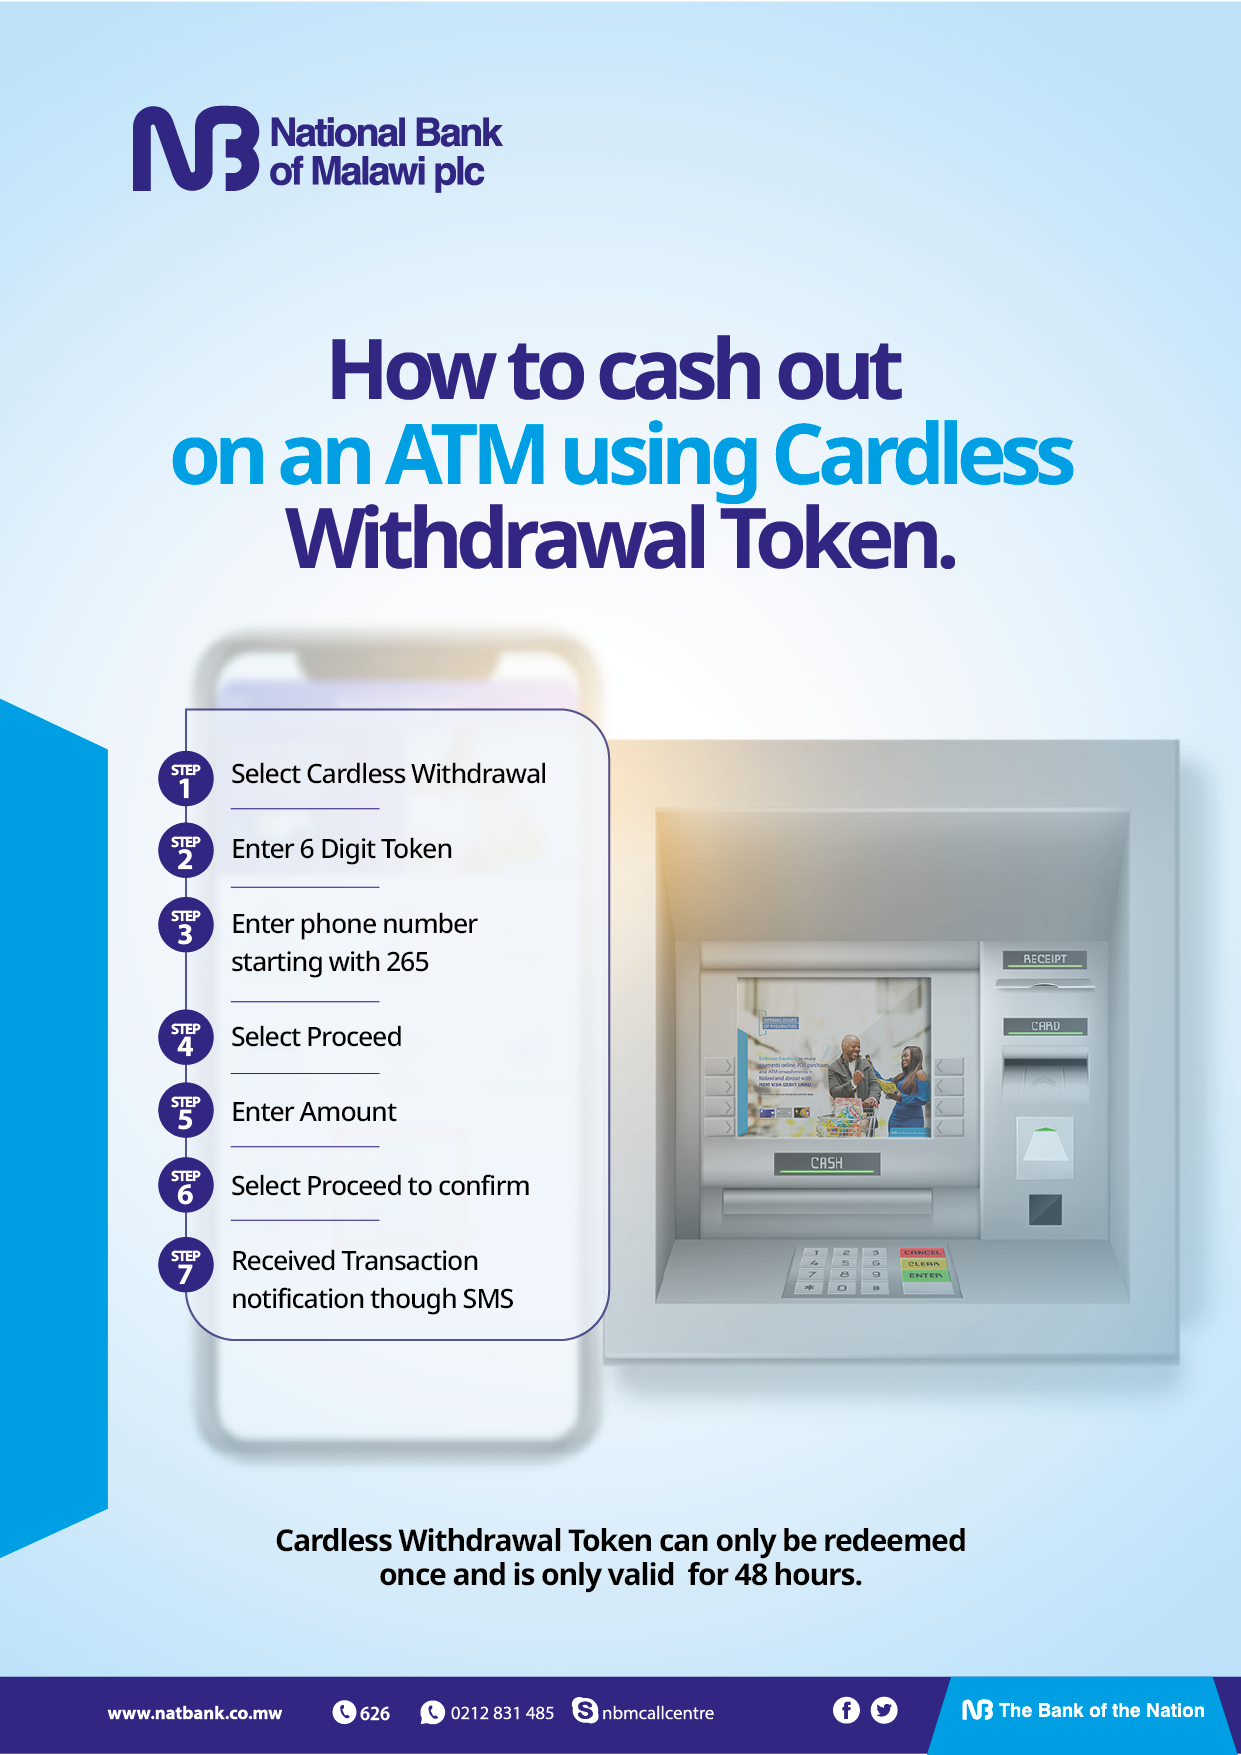 How to cash out on an ATM using Cardless Withdrawal Token